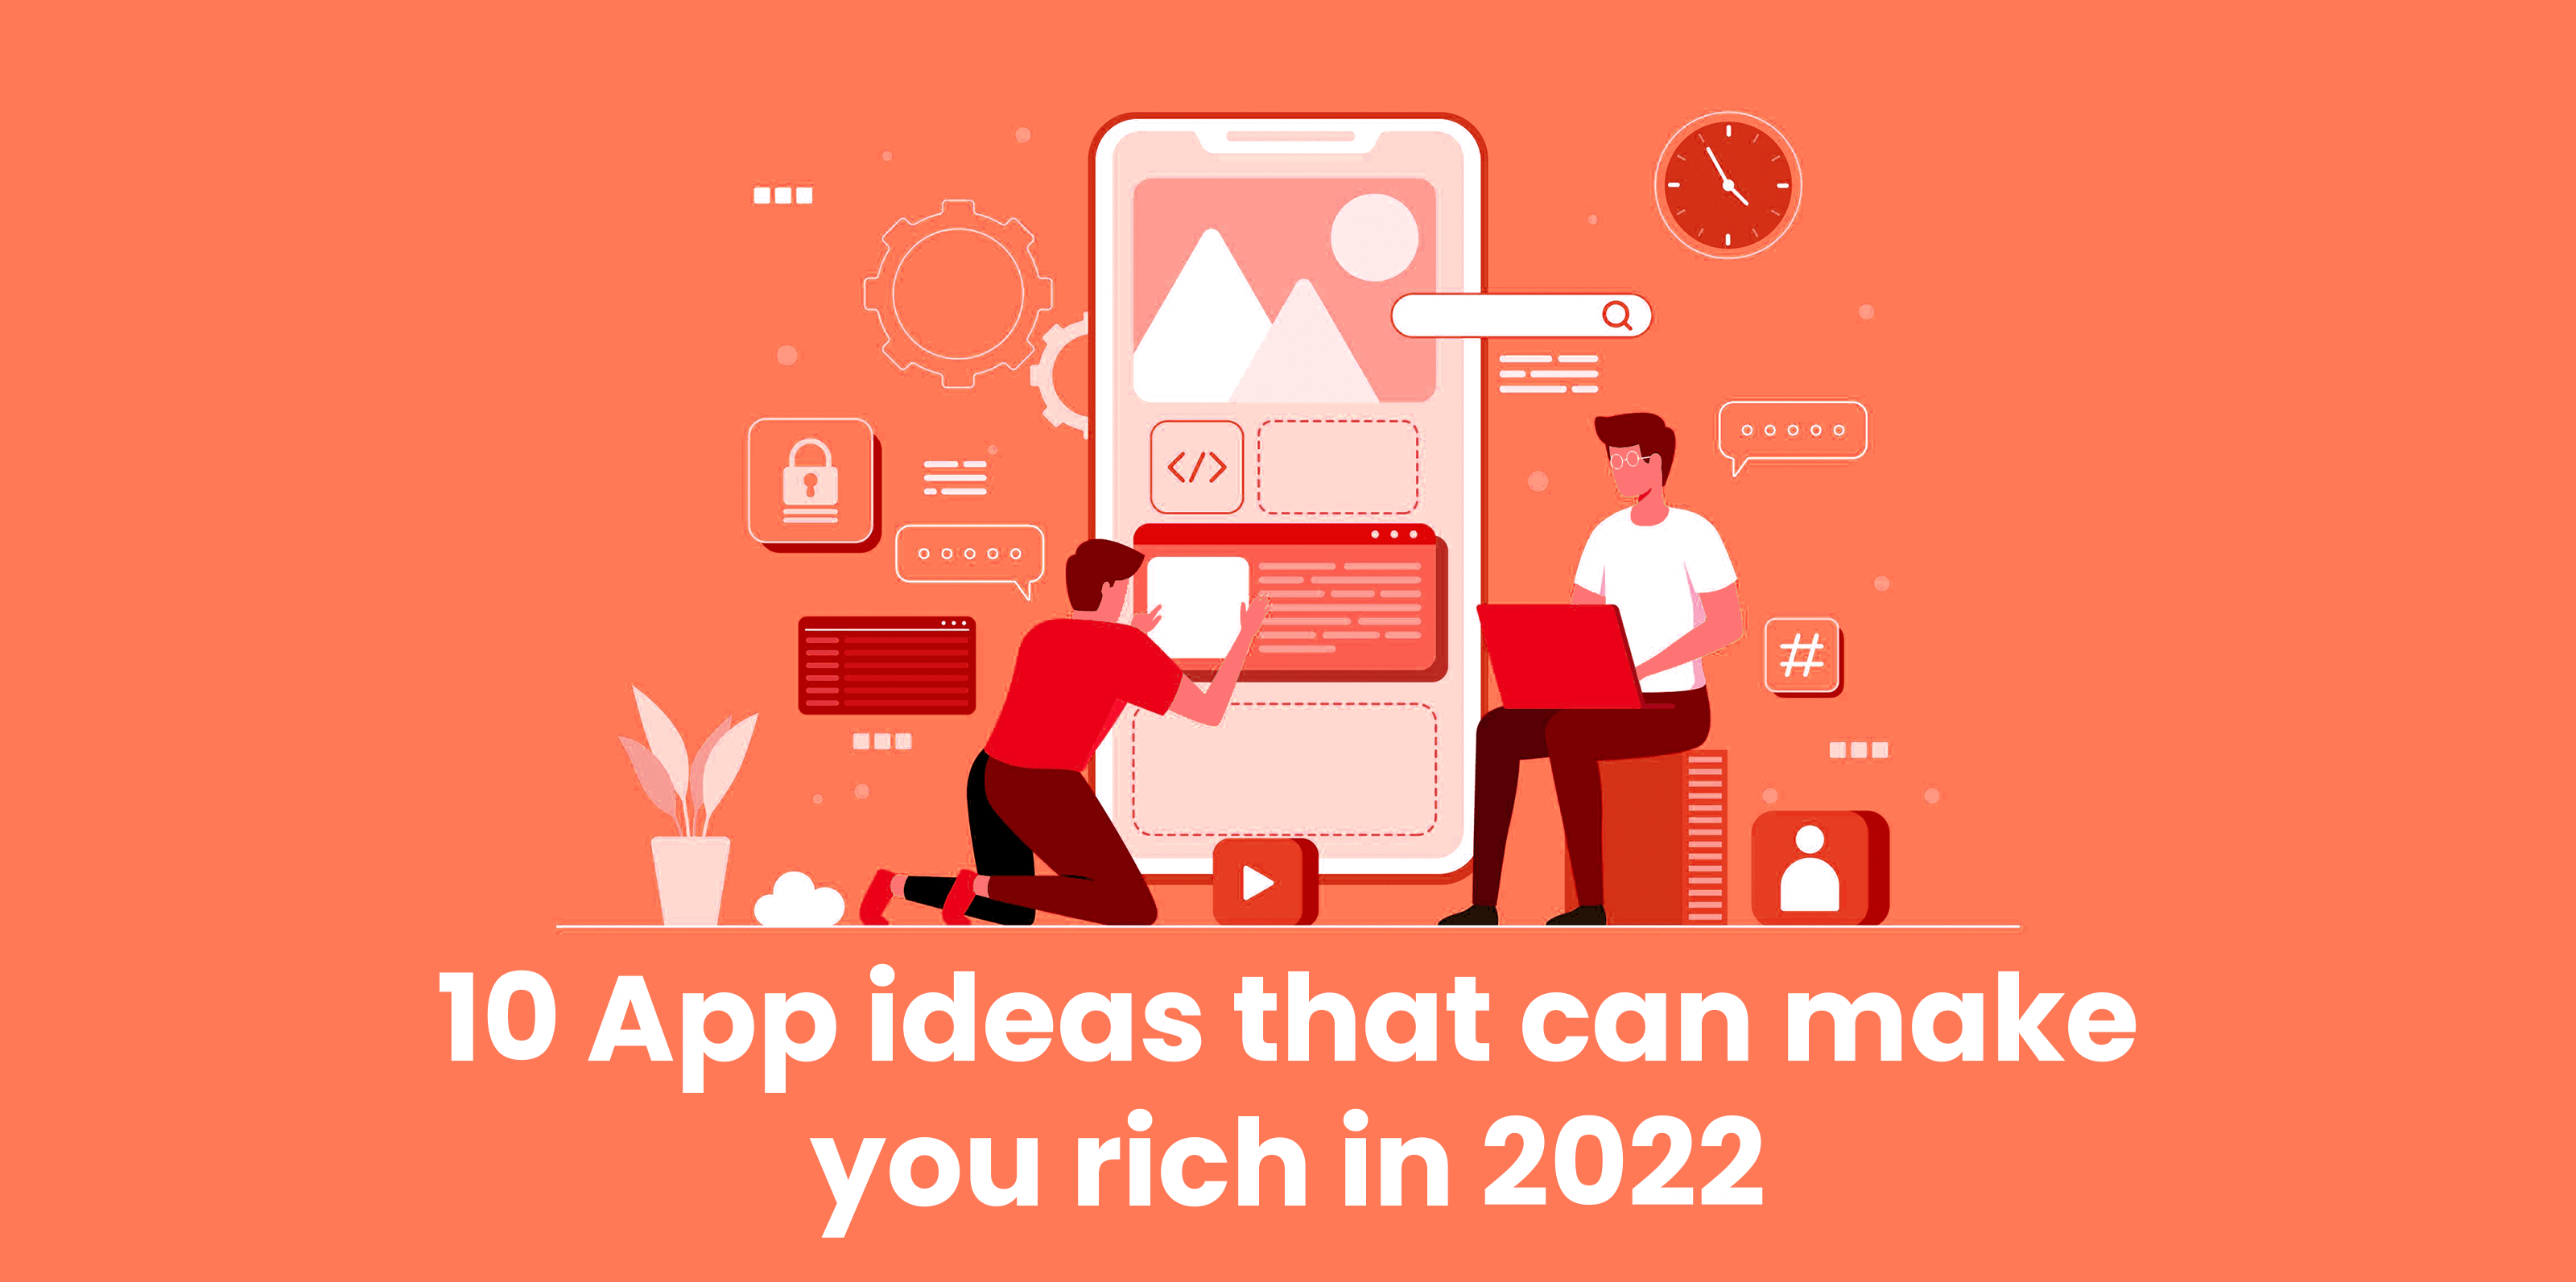 10-App-ideas- that-can-make-you-rich-in-2022